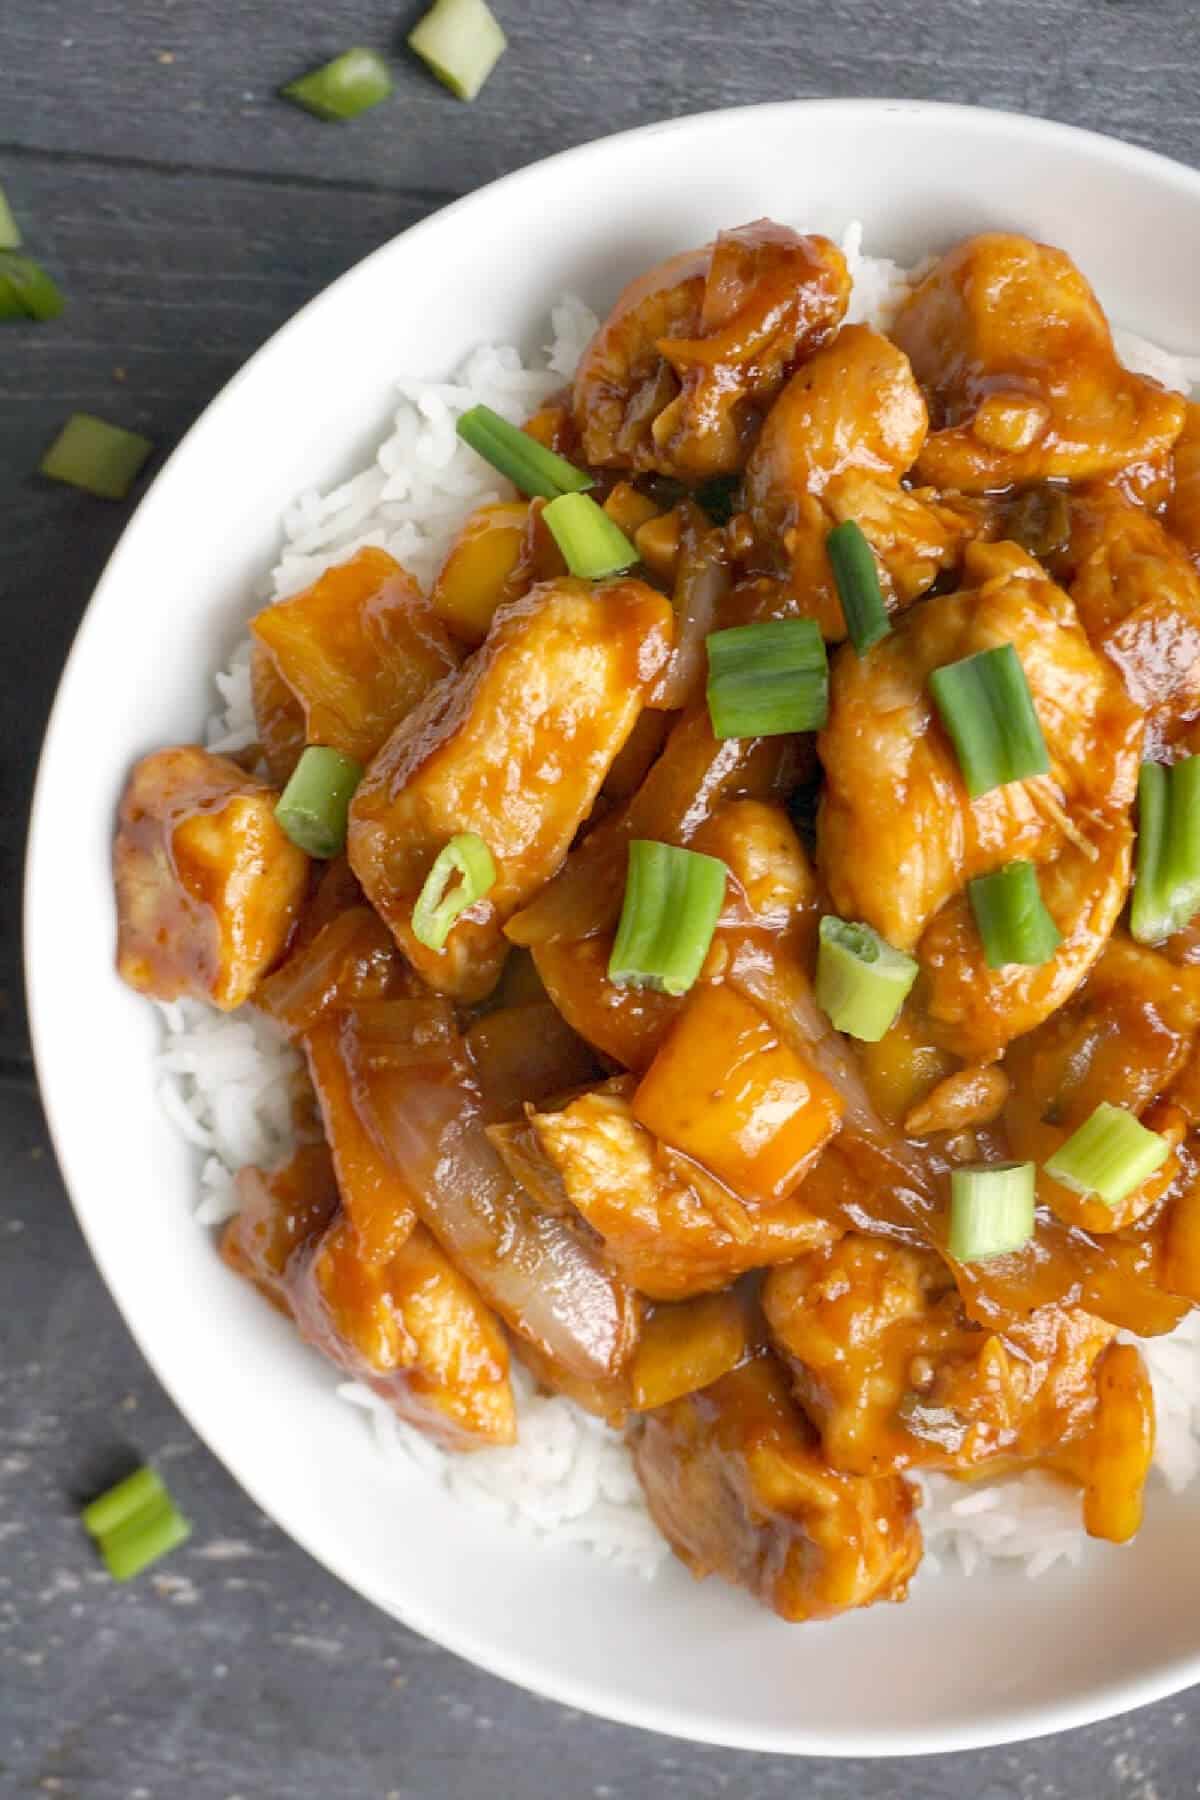 Sweet and sour chicken over a bed of rice.